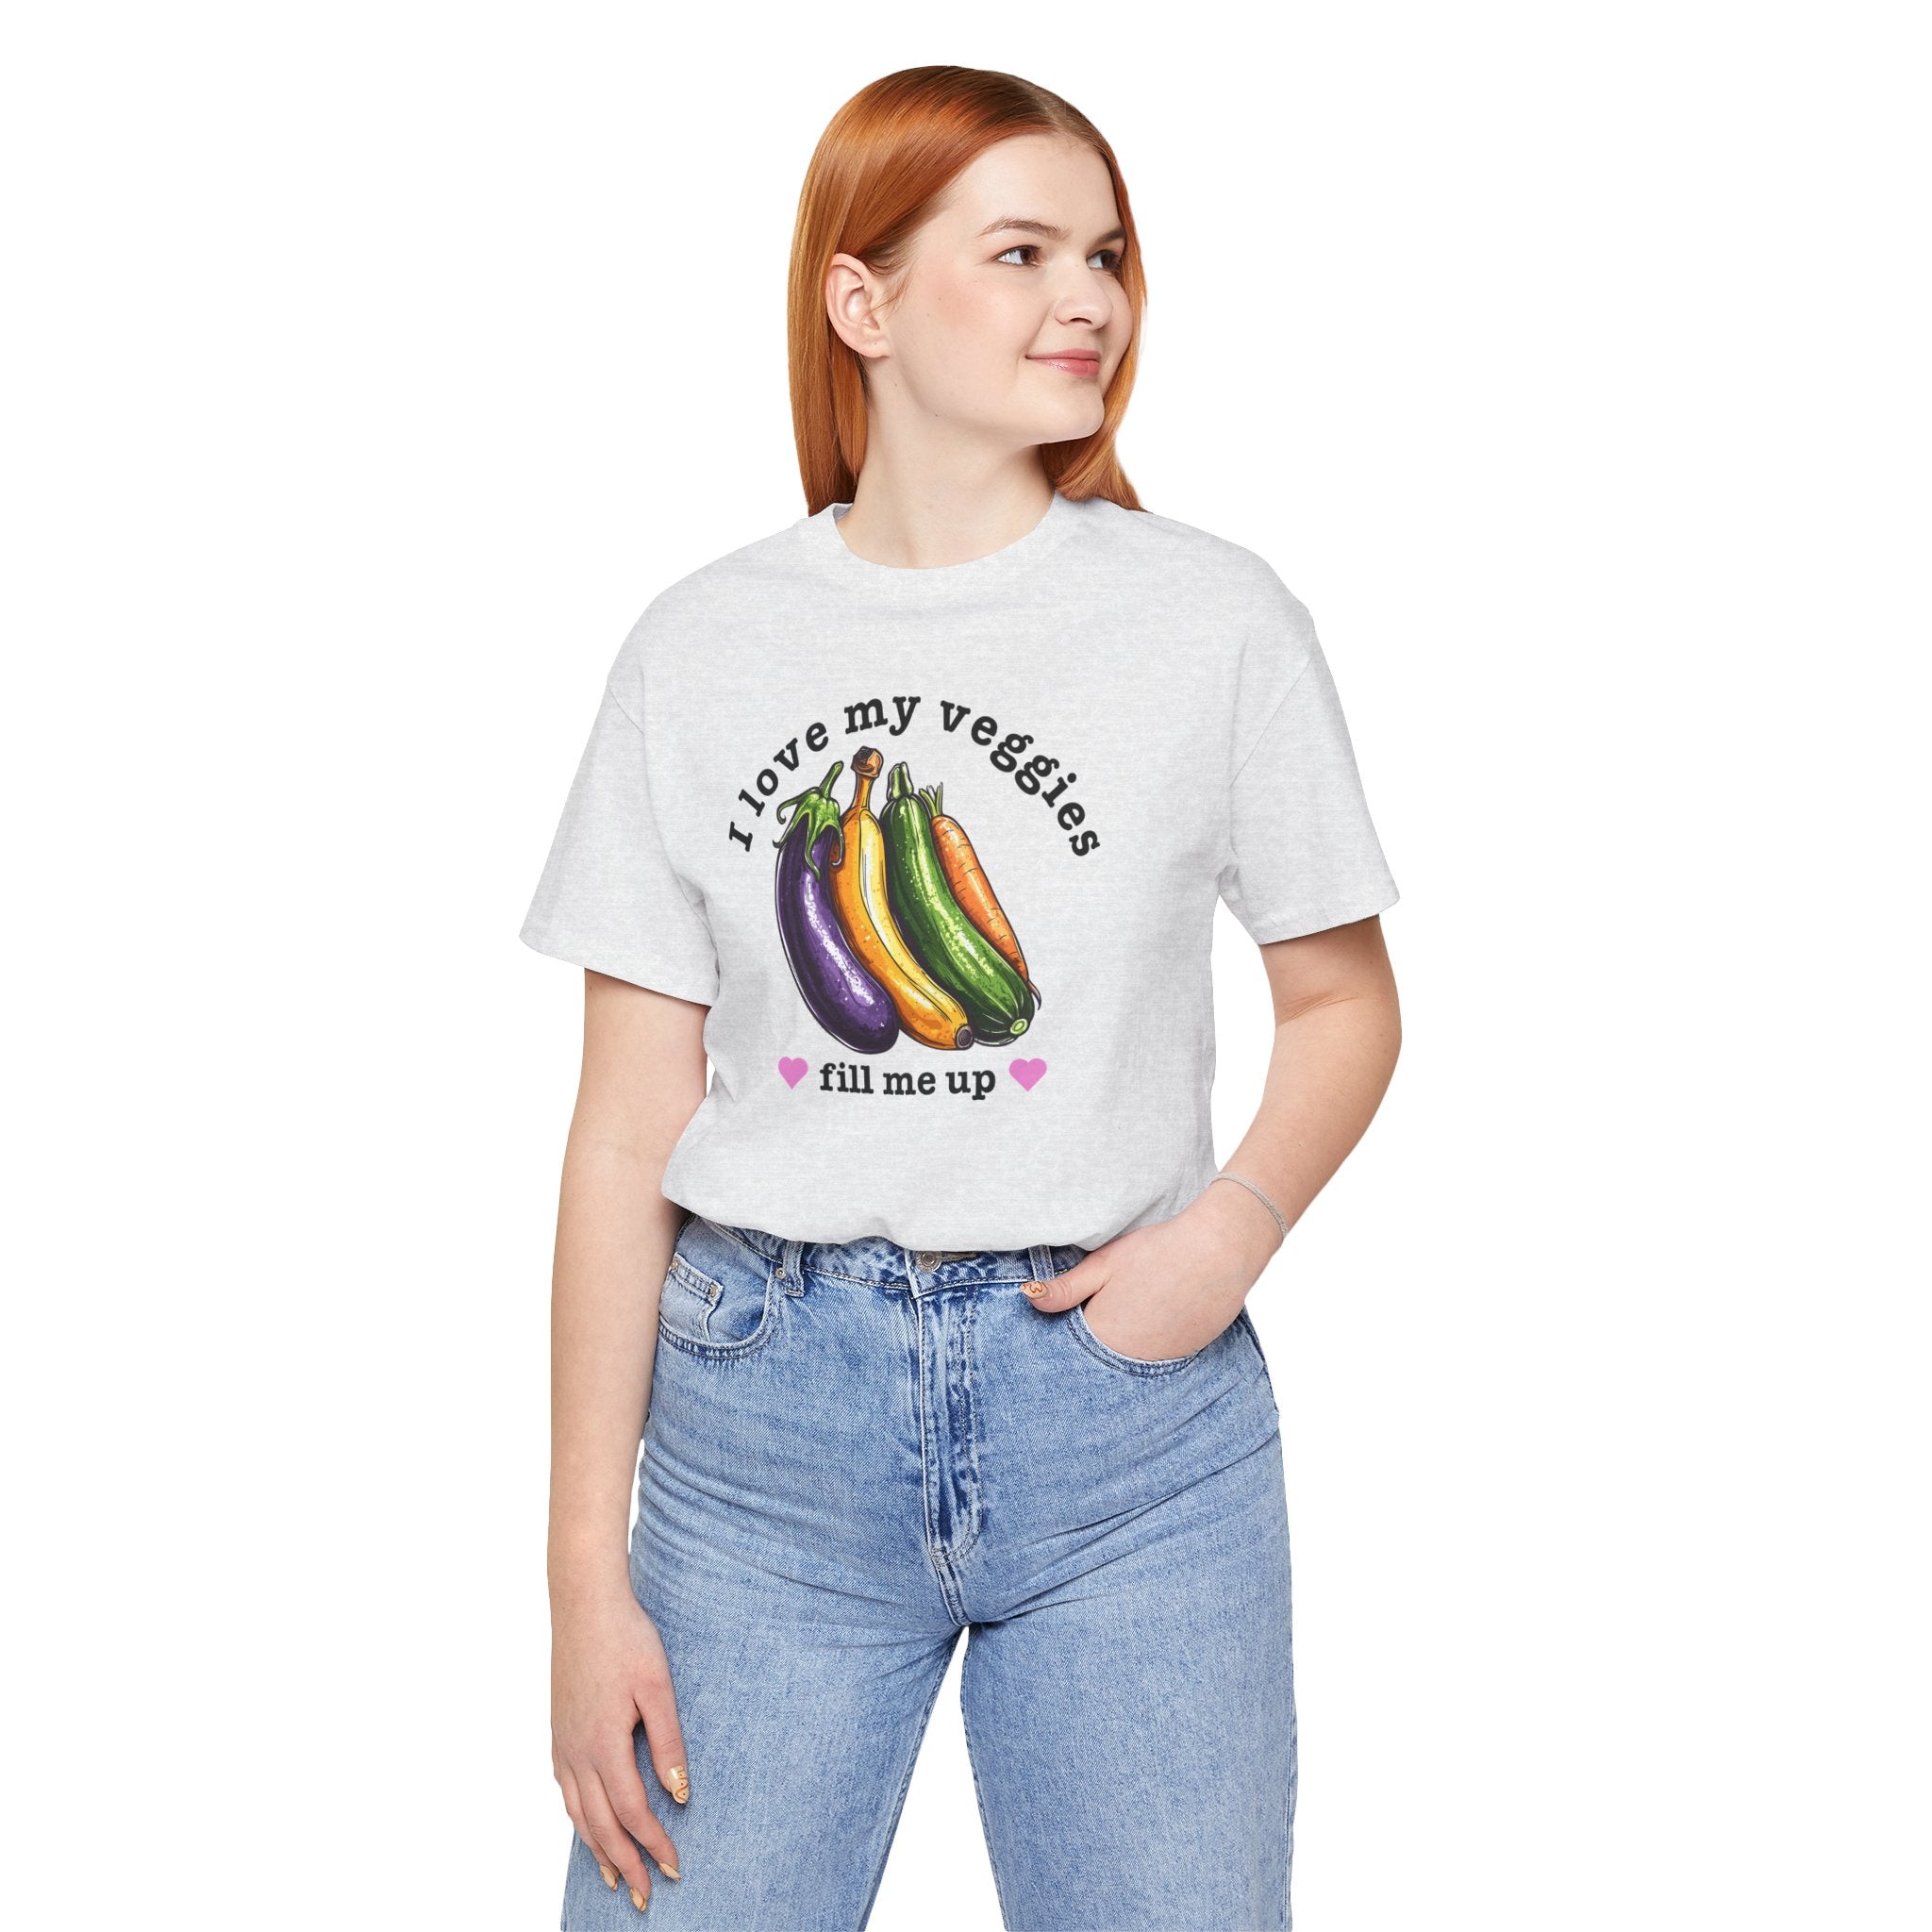 I Love My Veggies Fill Me Up Shirt Funny Vegetable Lover Tee